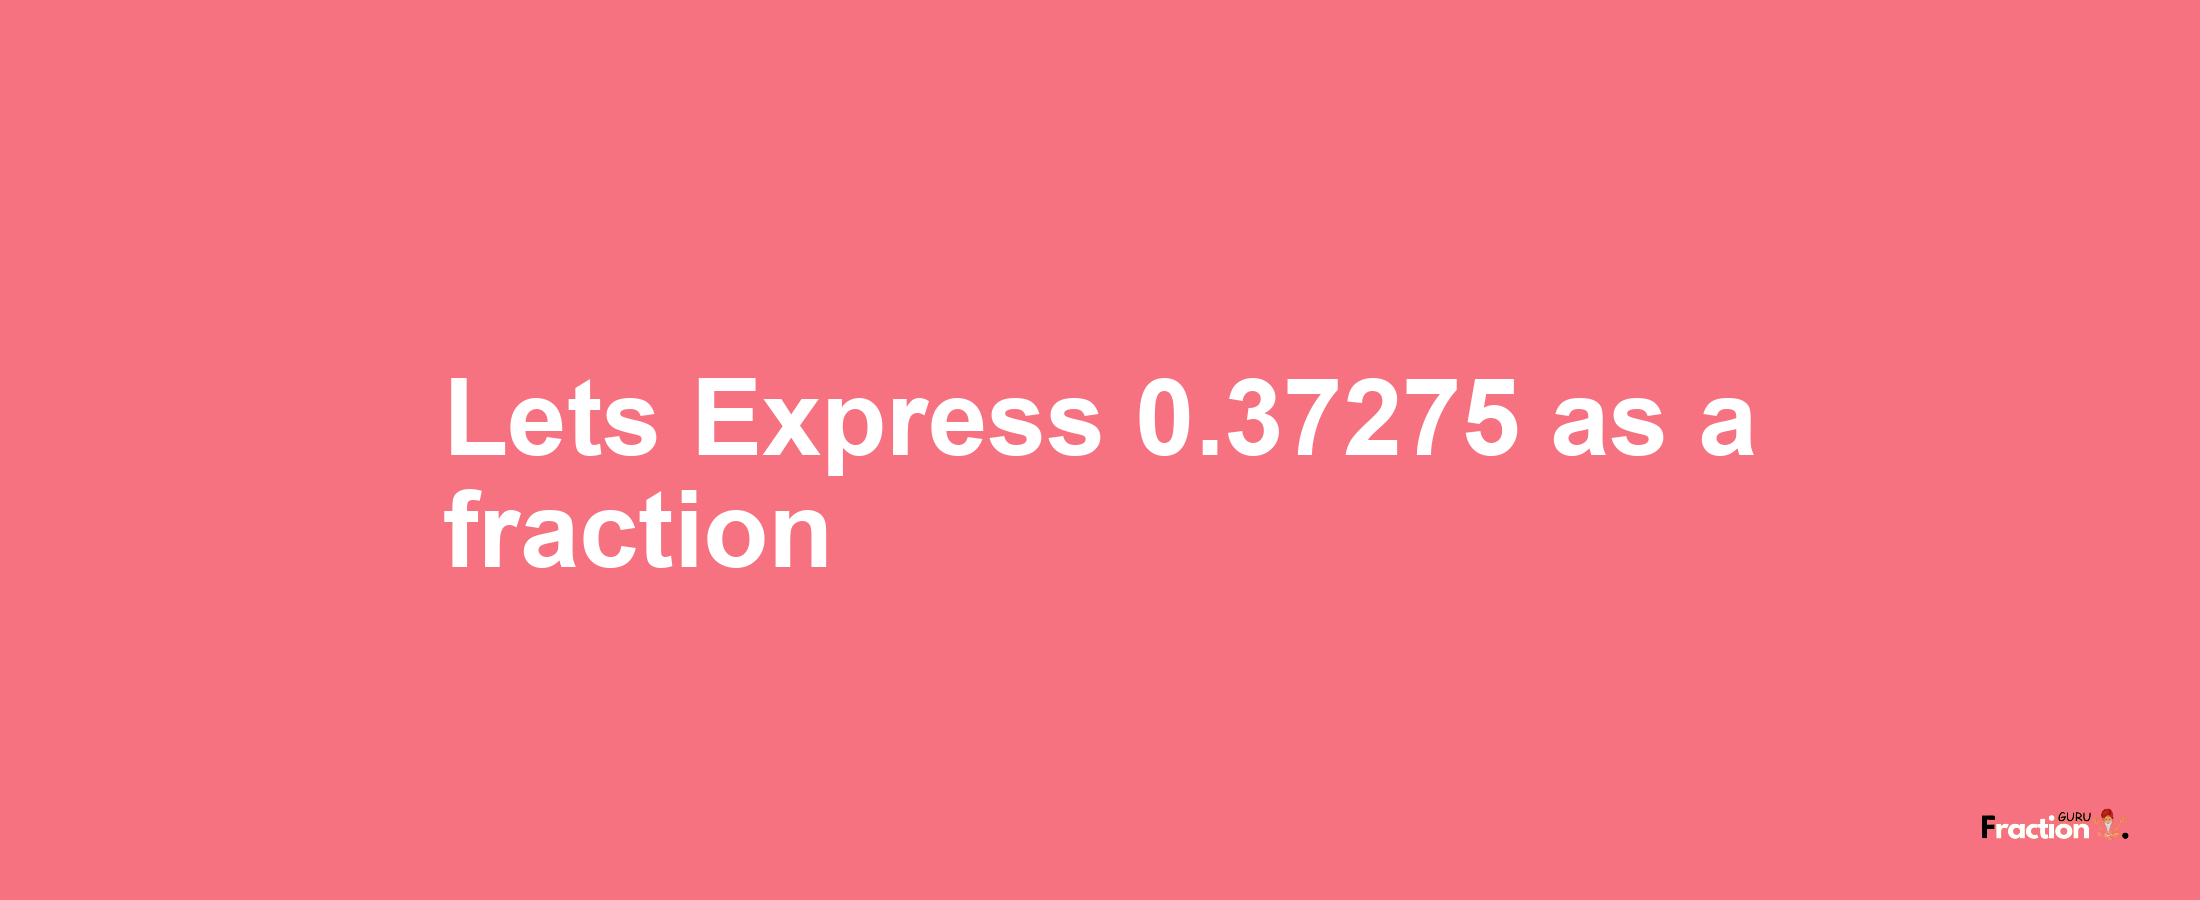 Lets Express 0.37275 as afraction